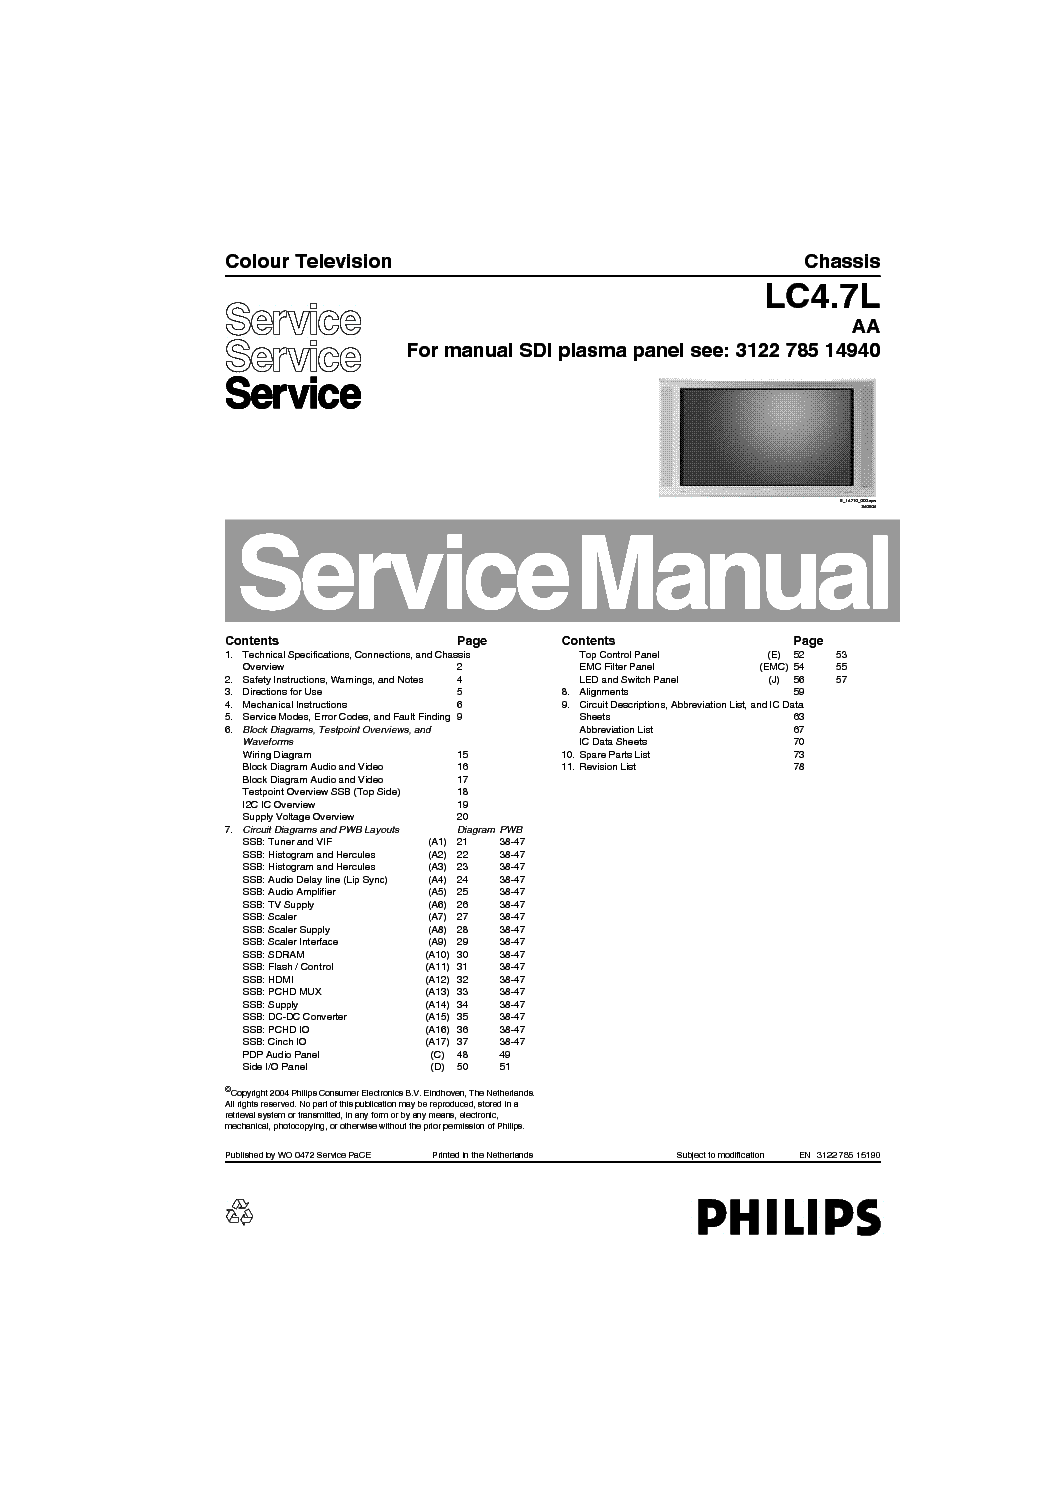 PHILIPS LC4.7LAA 312278515190 service manual (1st page)